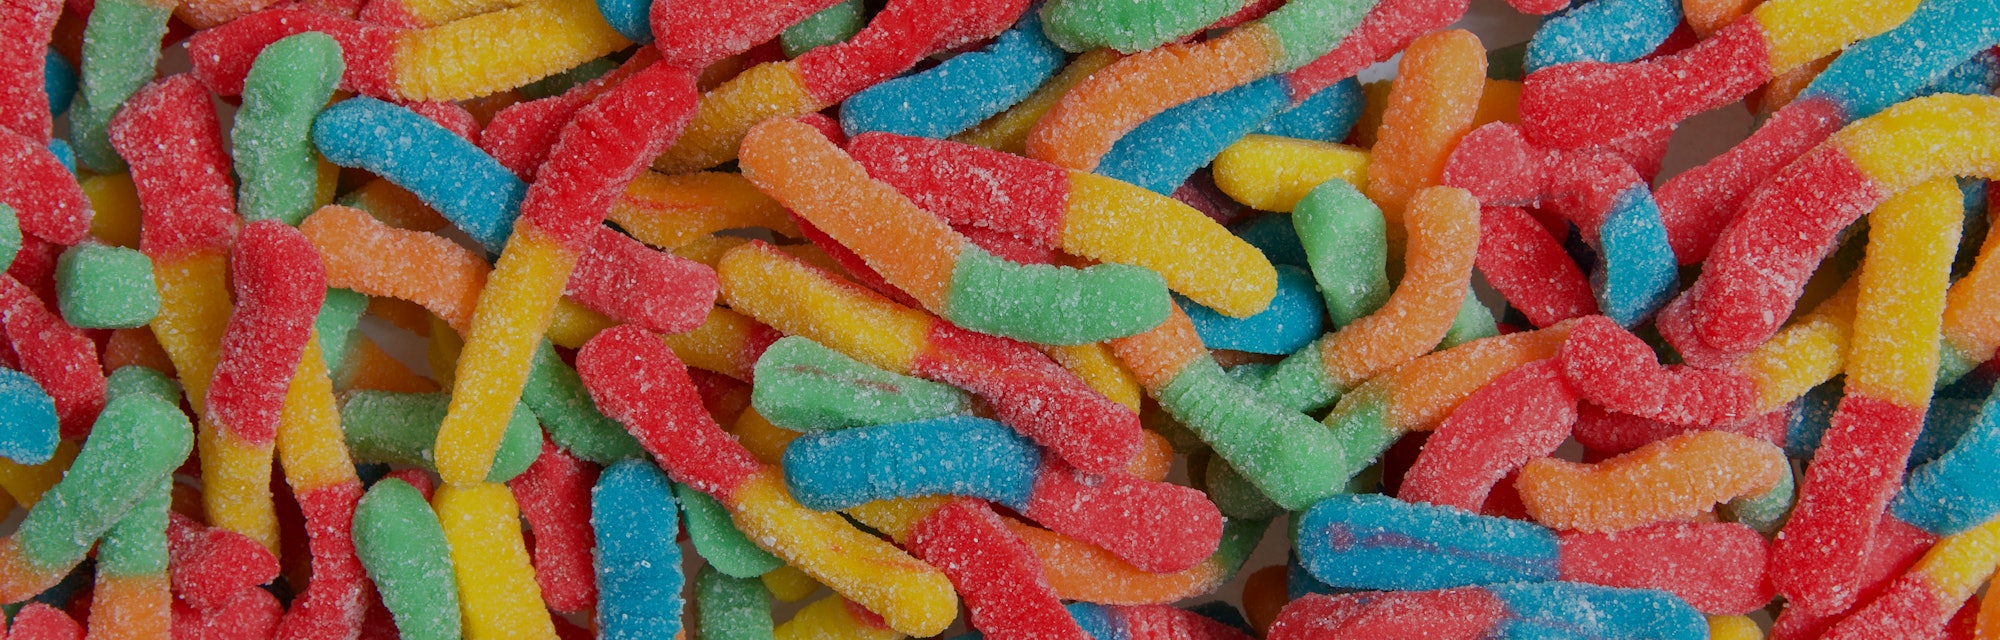 Sour candy gummy worms close up background. Covered in granulated sugar. Flat lay top view from abov...